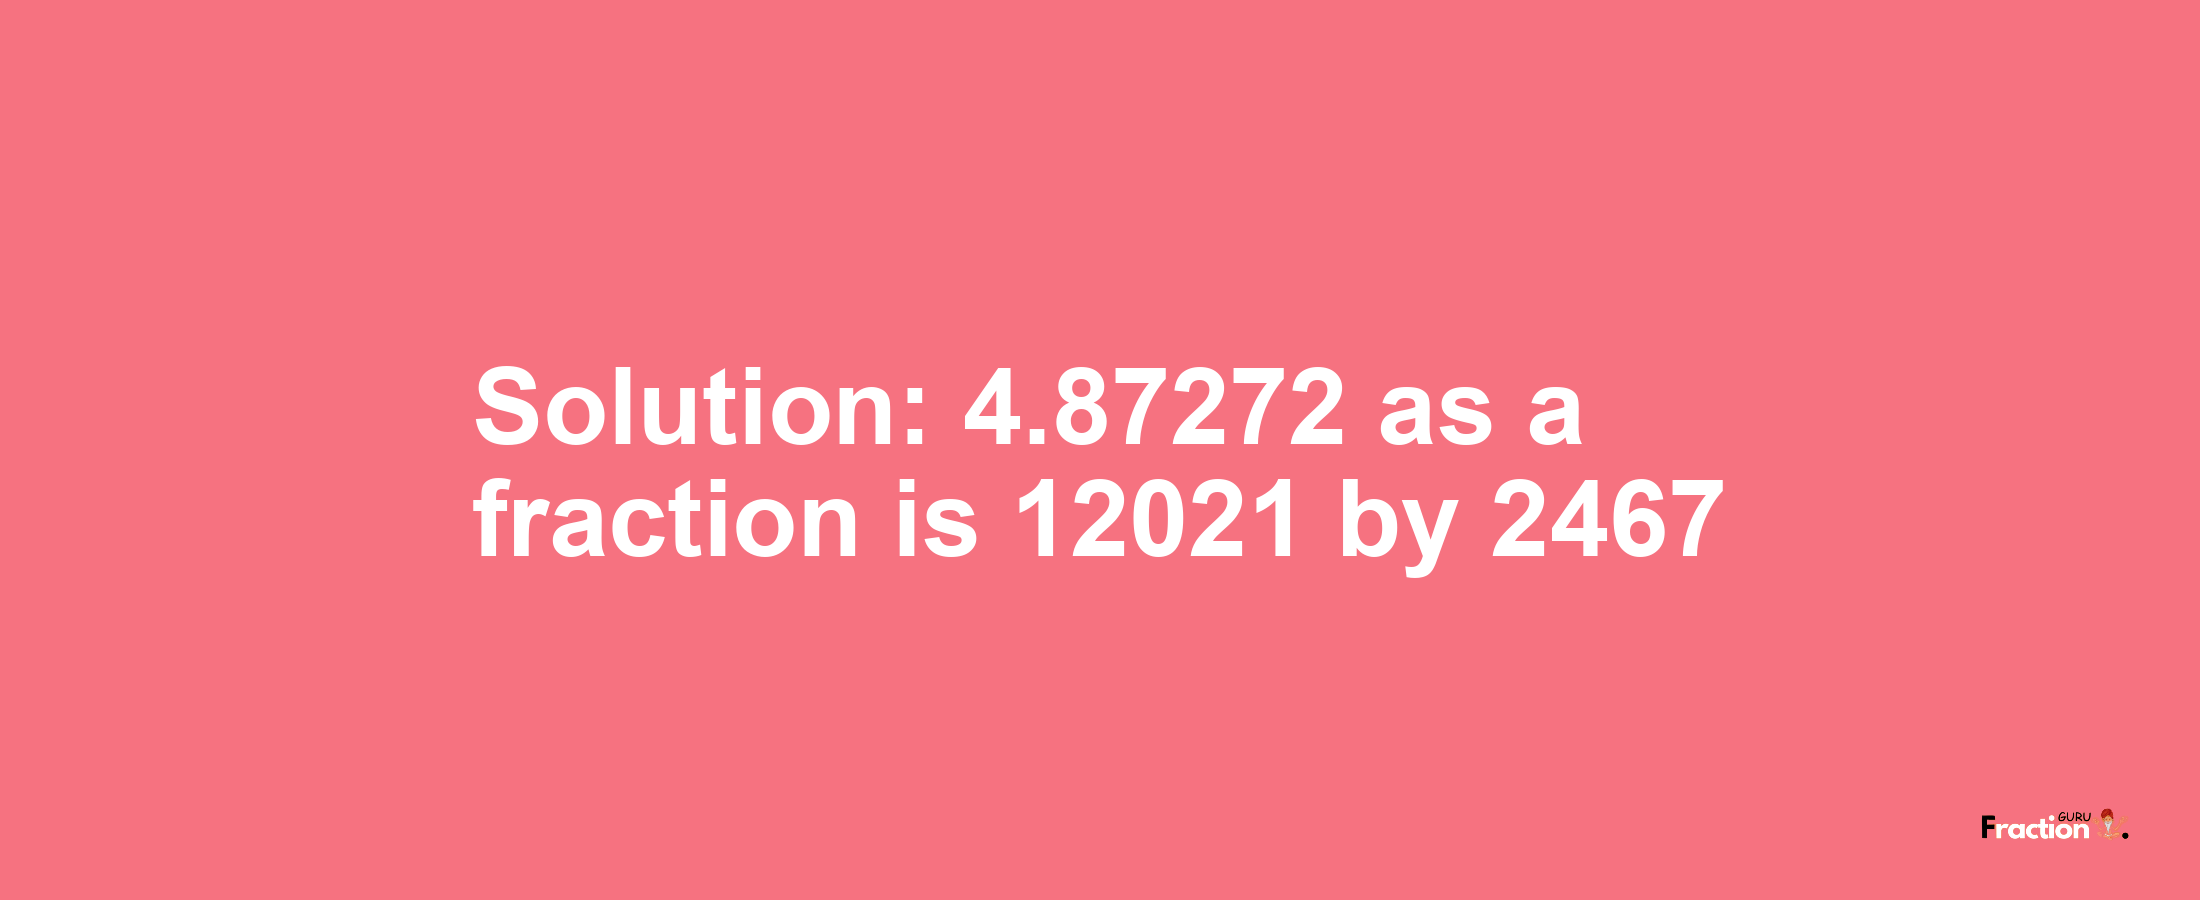 Solution:4.87272 as a fraction is 12021/2467